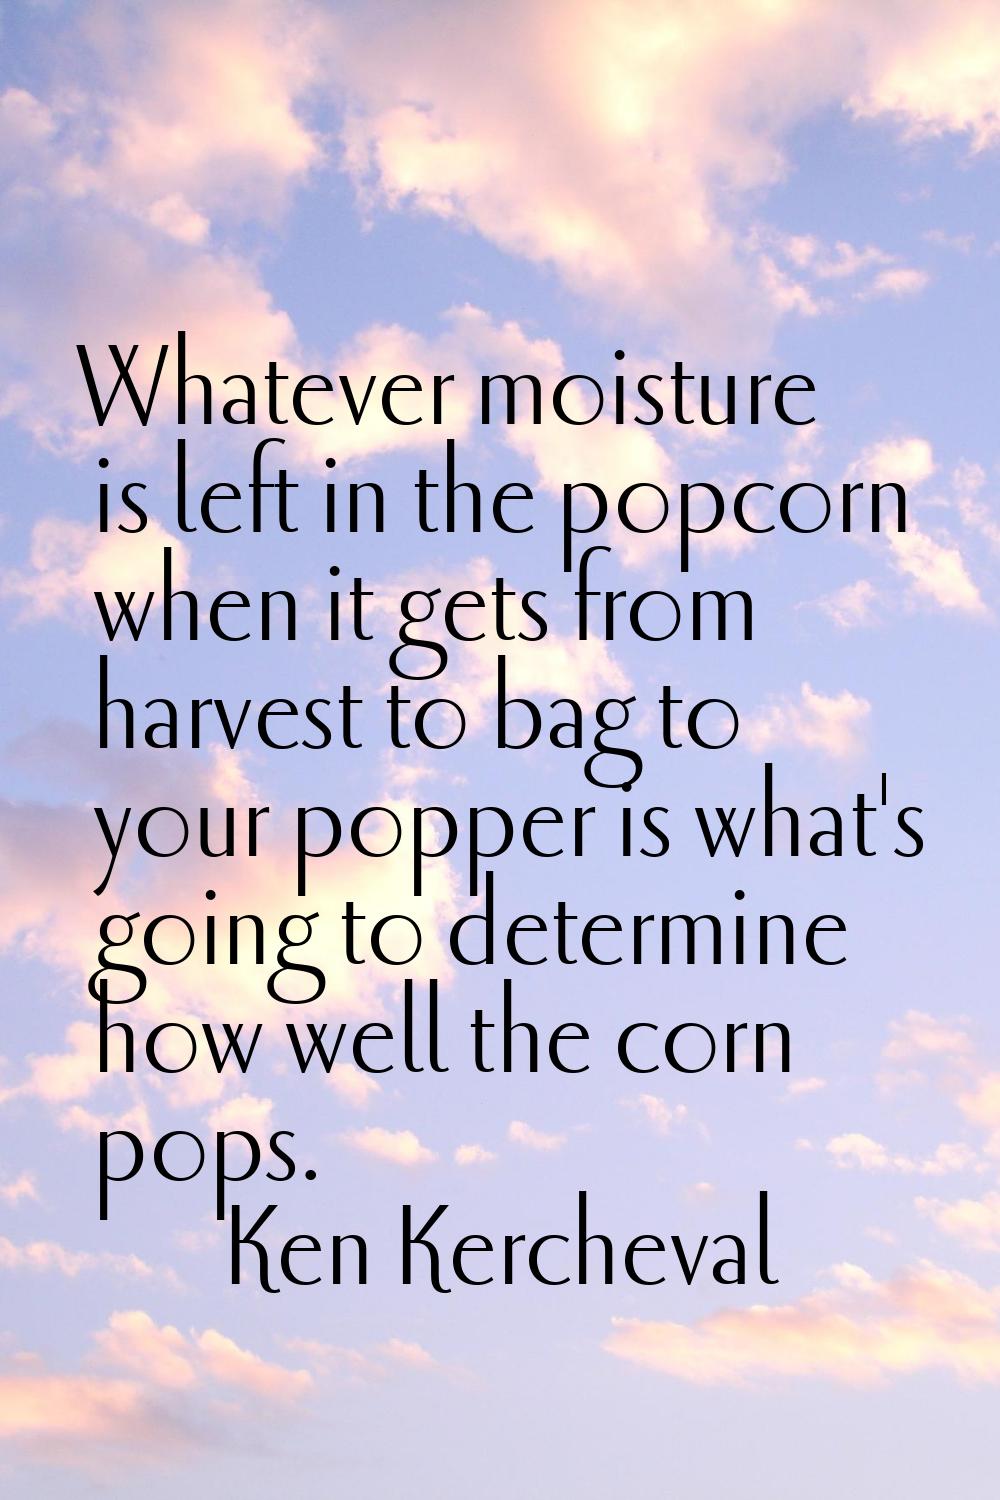 Whatever moisture is left in the popcorn when it gets from harvest to bag to your popper is what's 